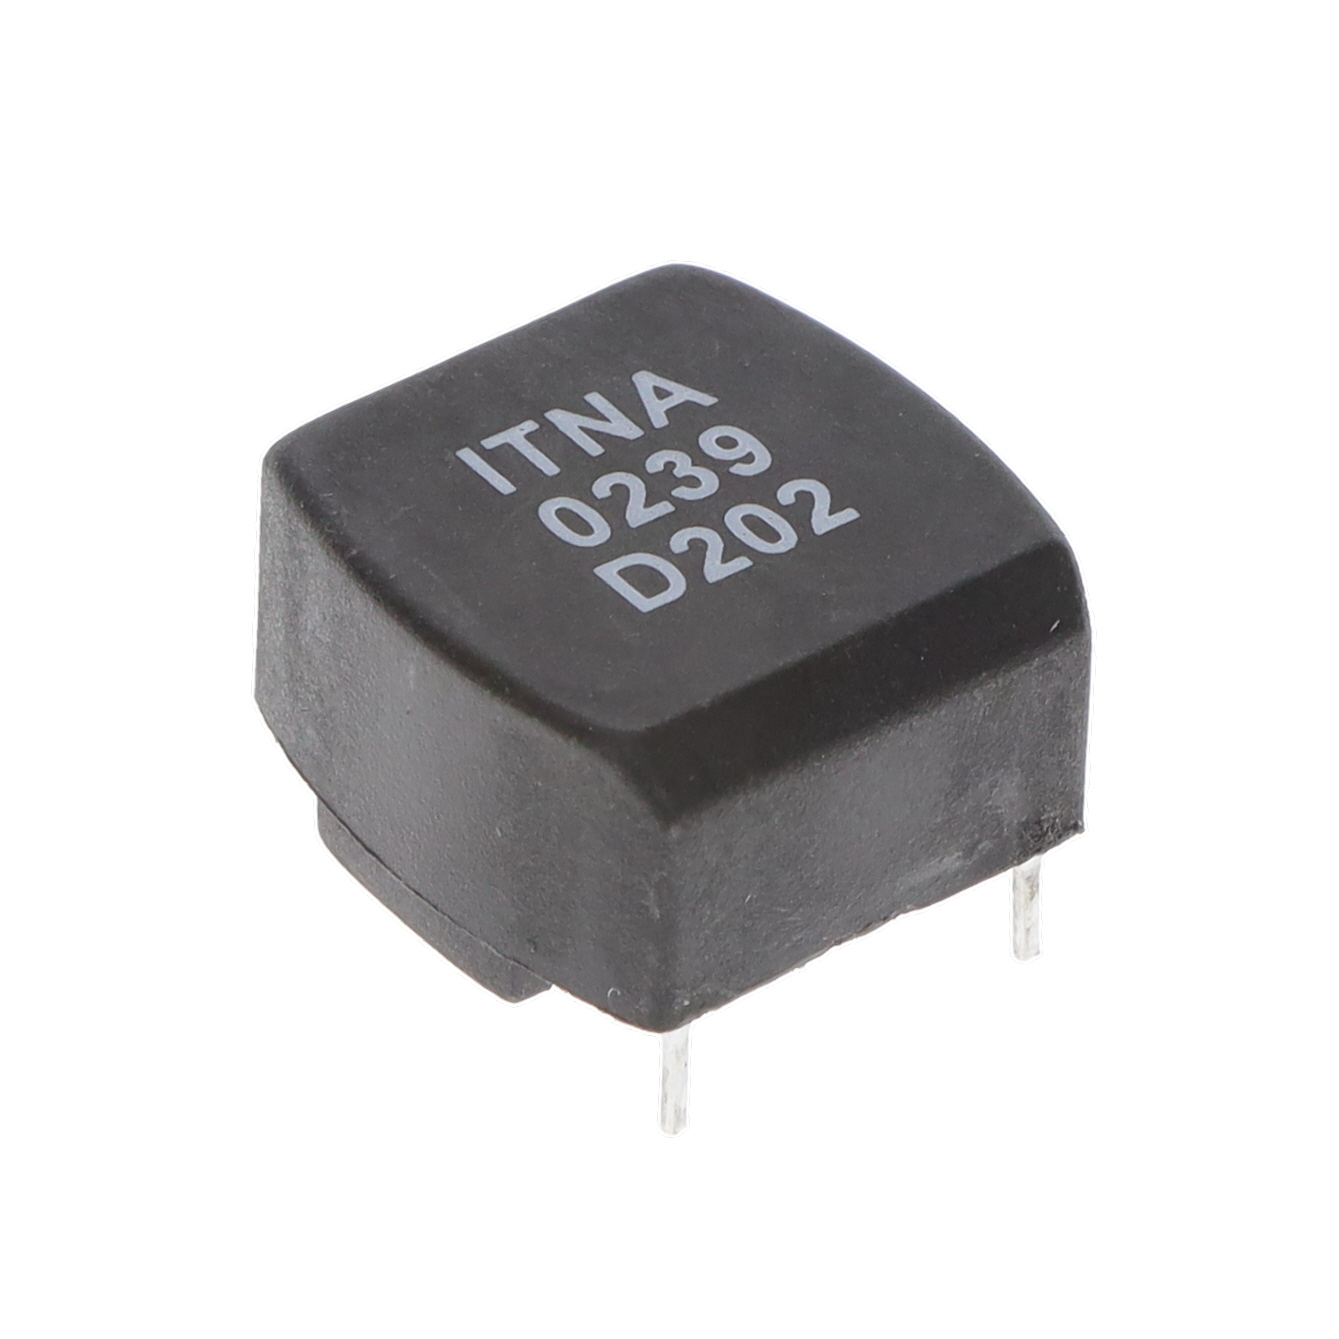 The model is ITNA-0239-D202